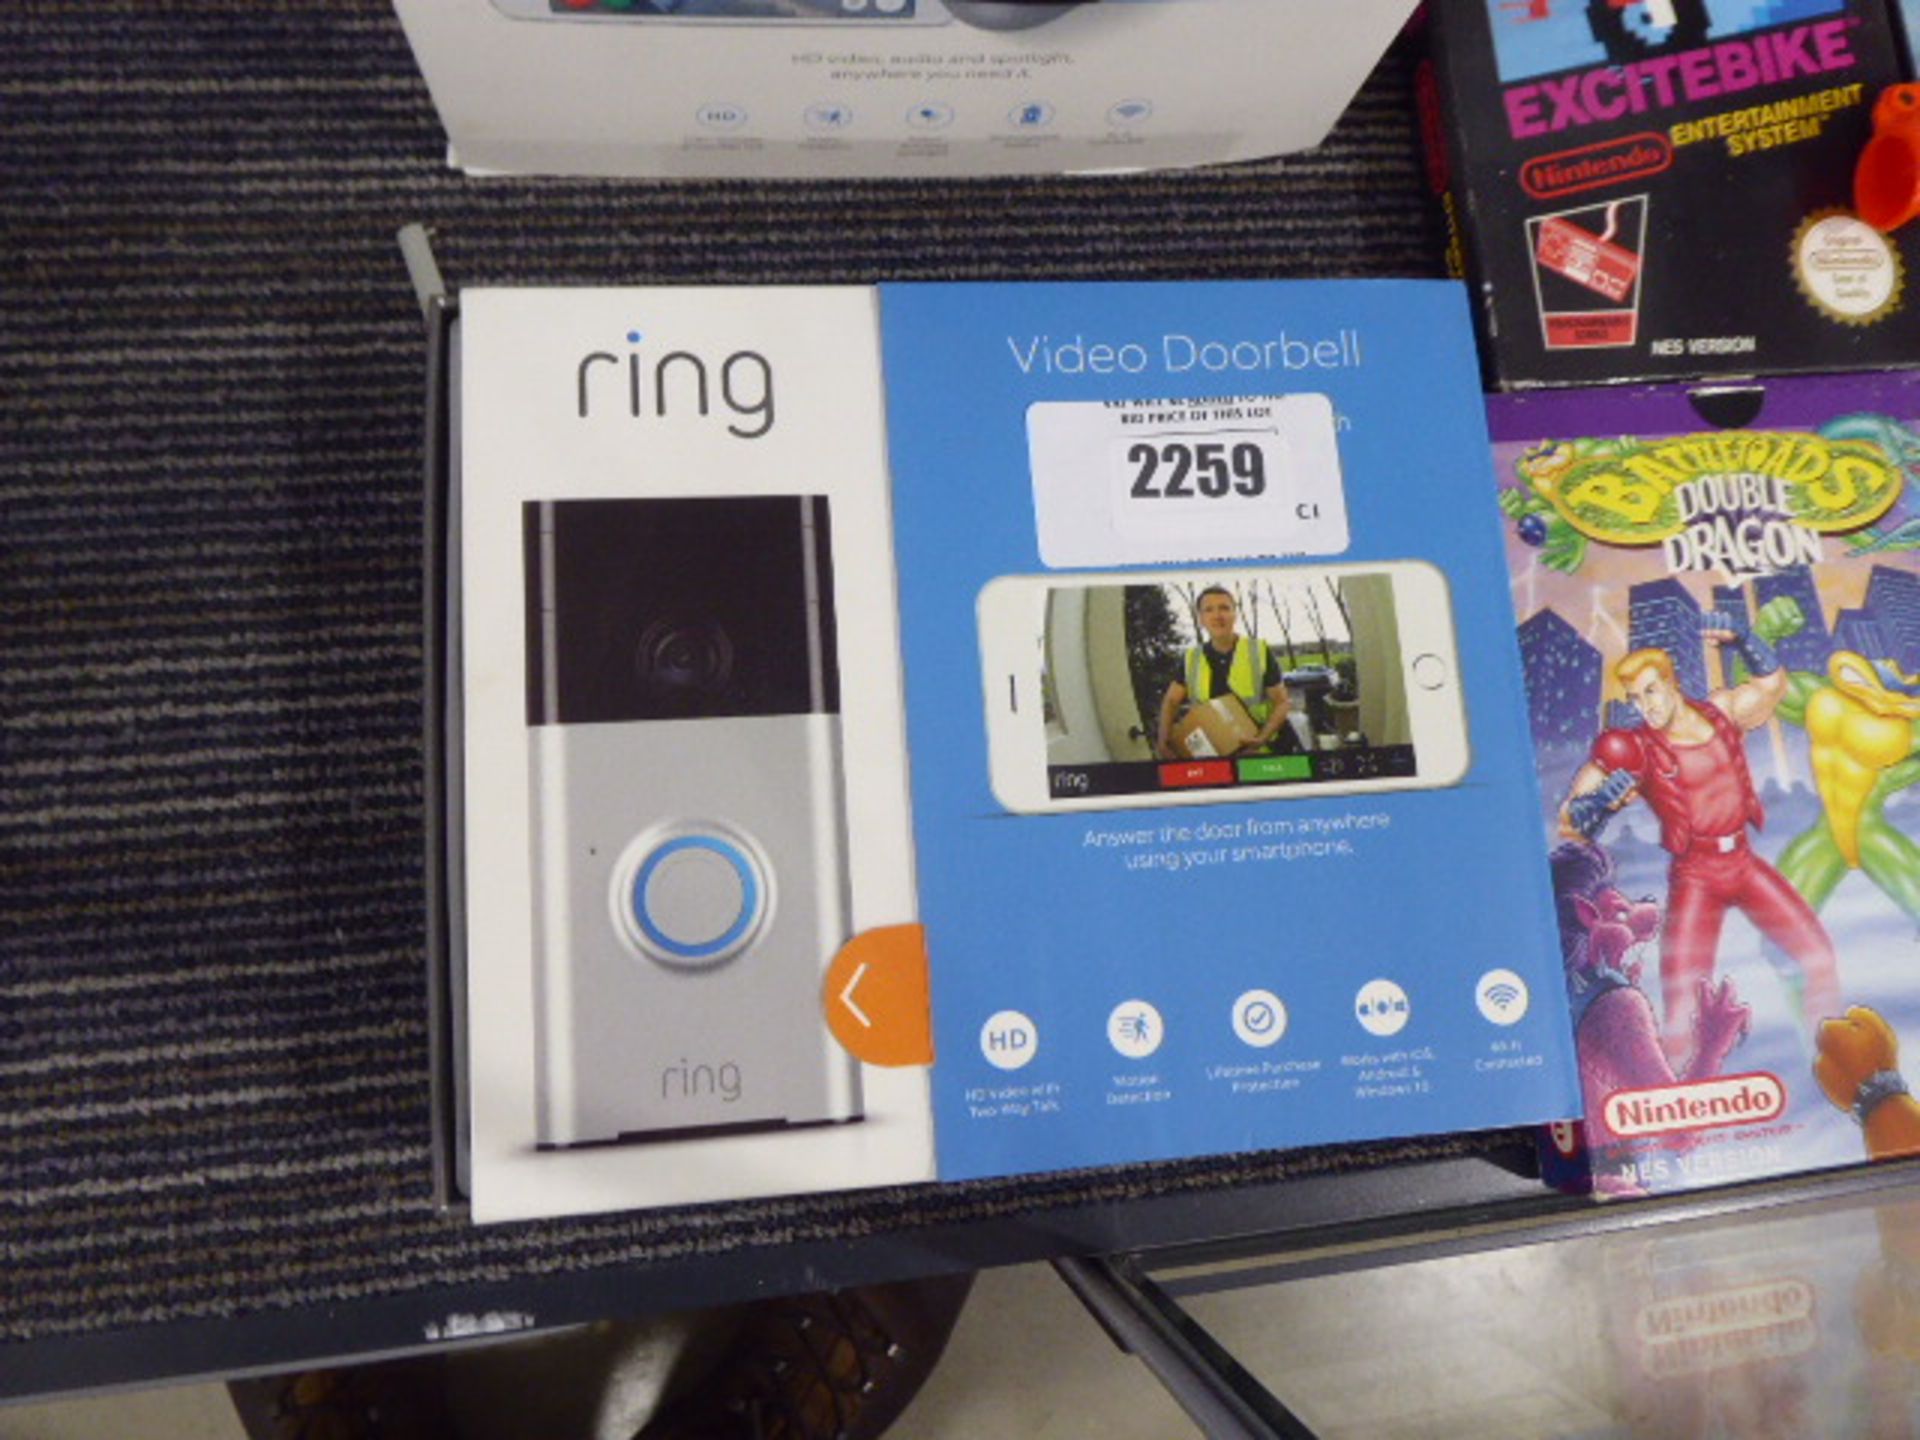 Ring video doorbell system in box with plug adaptor and chime